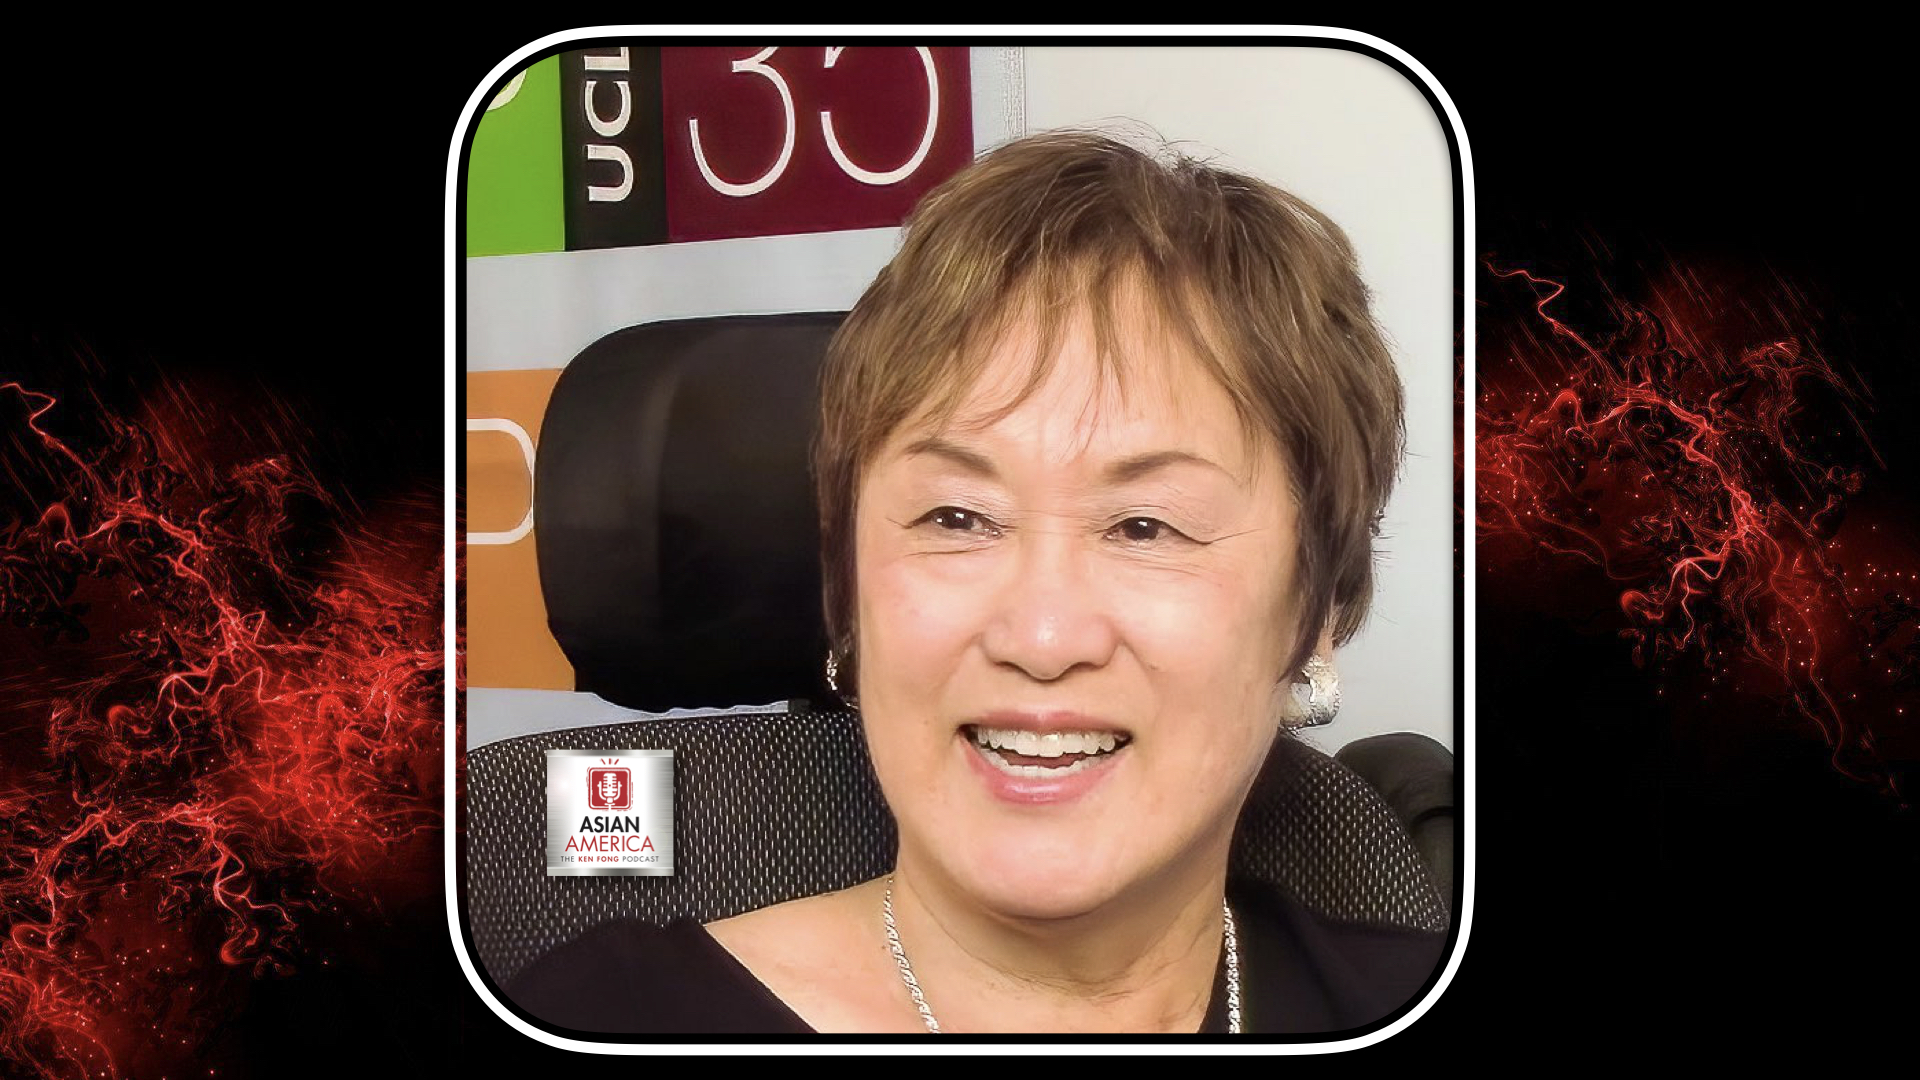 EP 25: Vivian Matsushige On Being Thankful and Finding Meaning After Becoming A Paraplegic